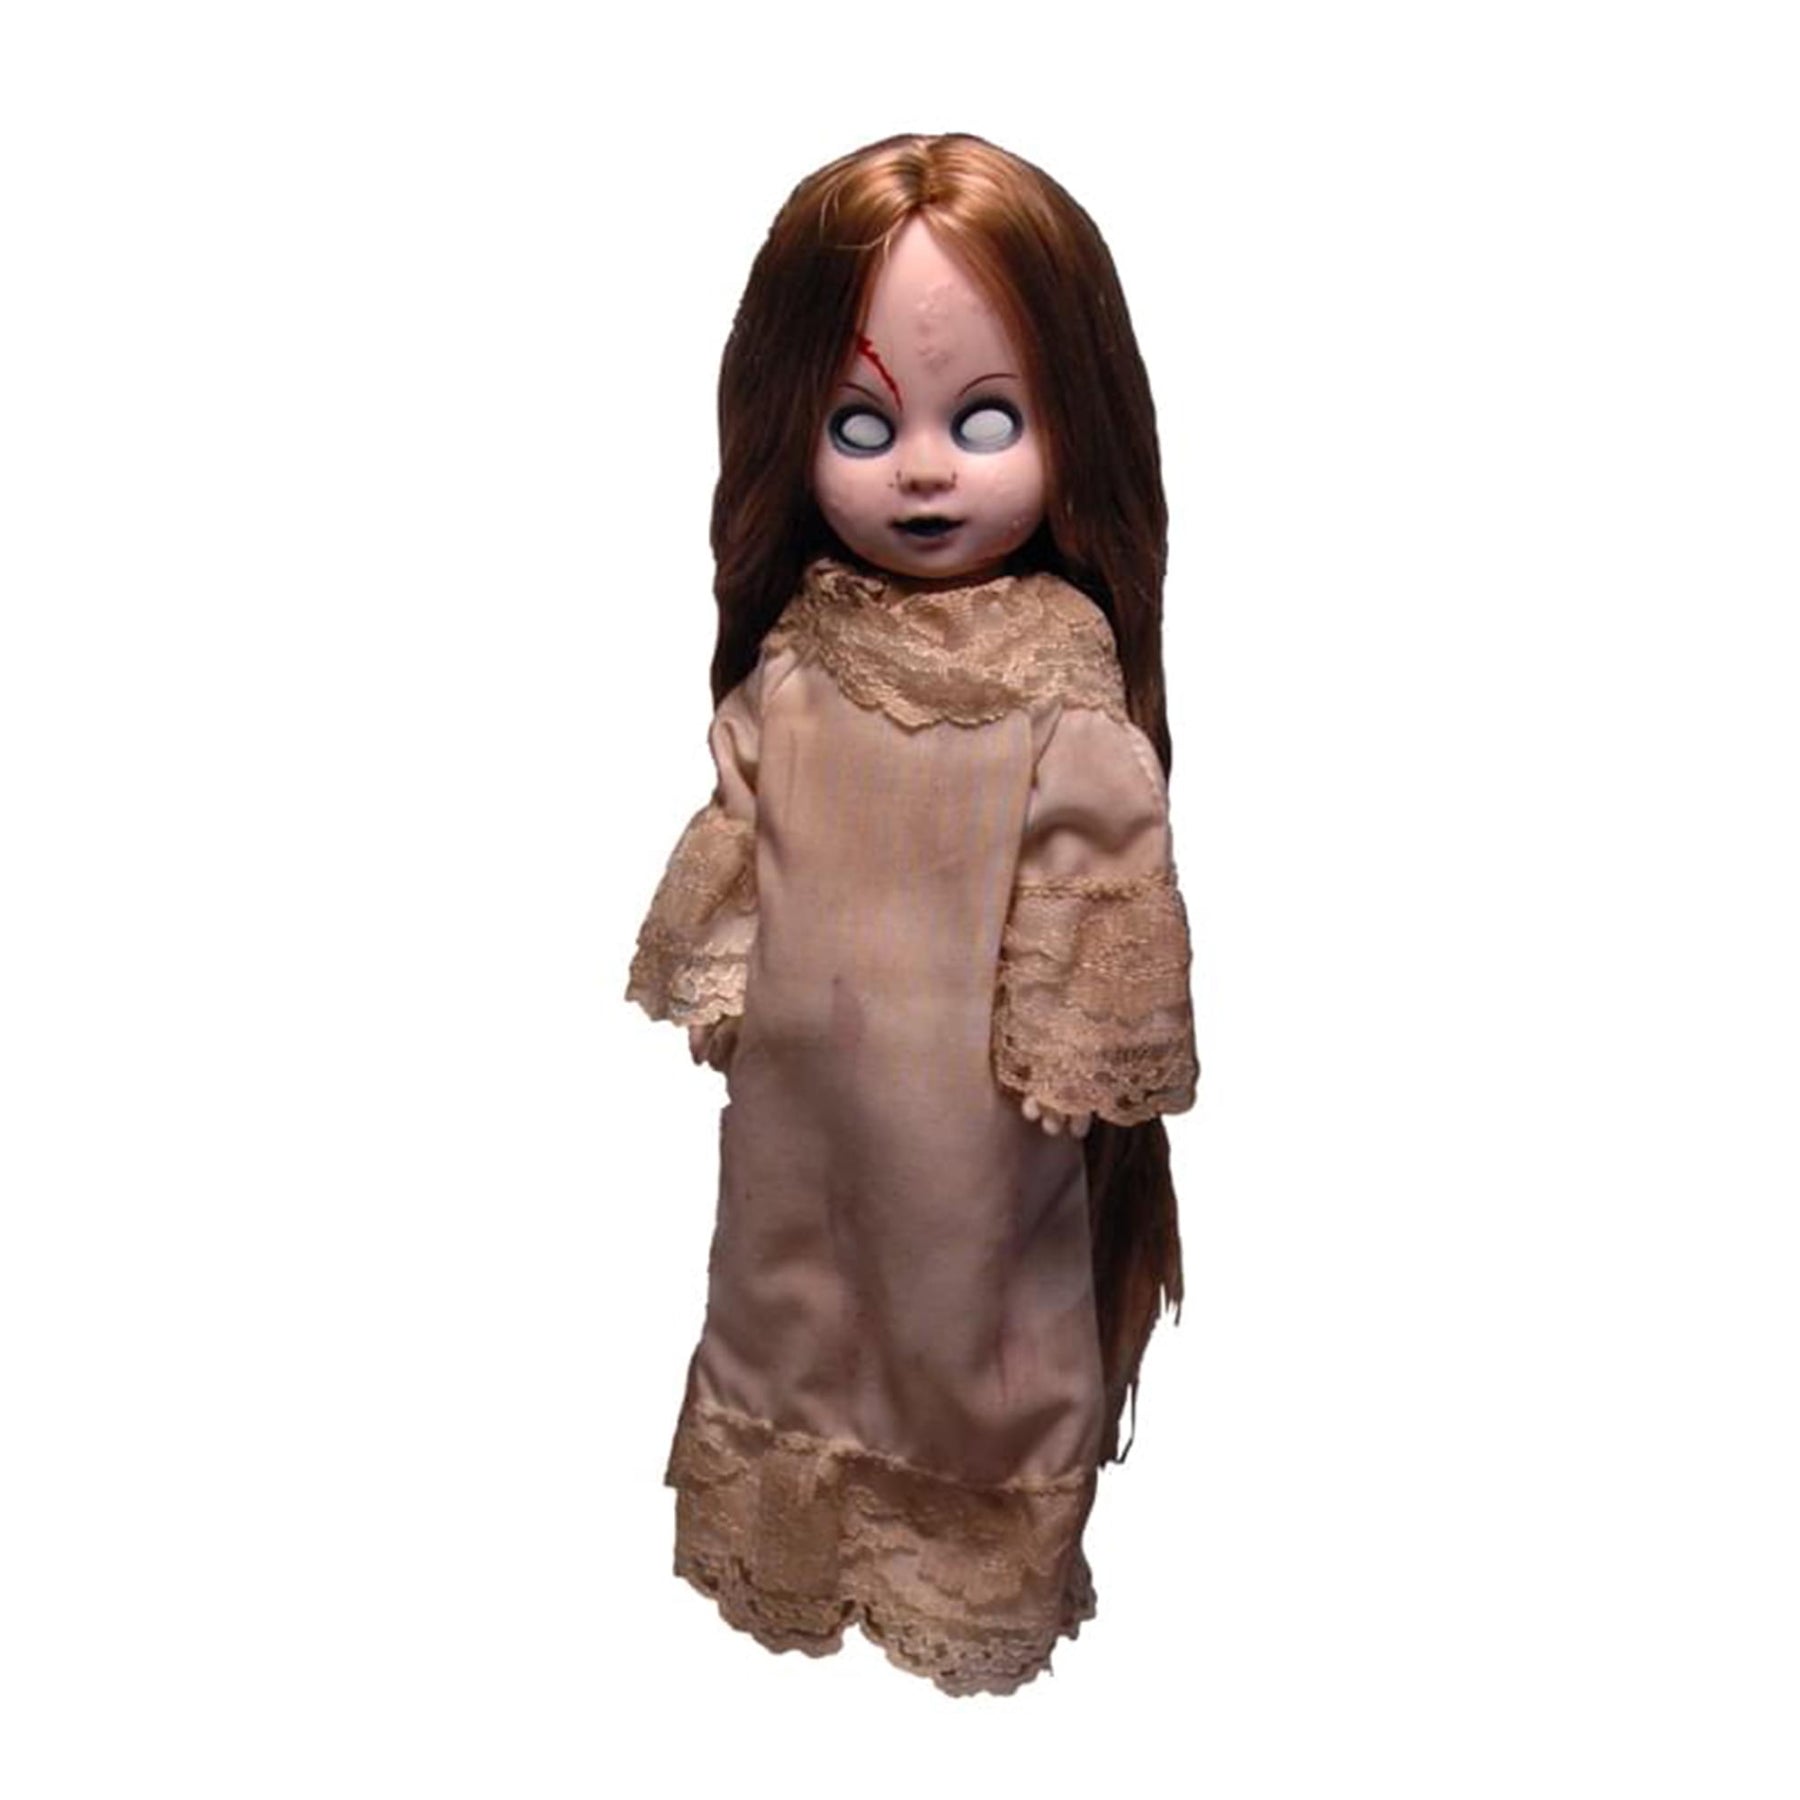 Living Dead Dolls 13th Anniversary Exclusive: Posey